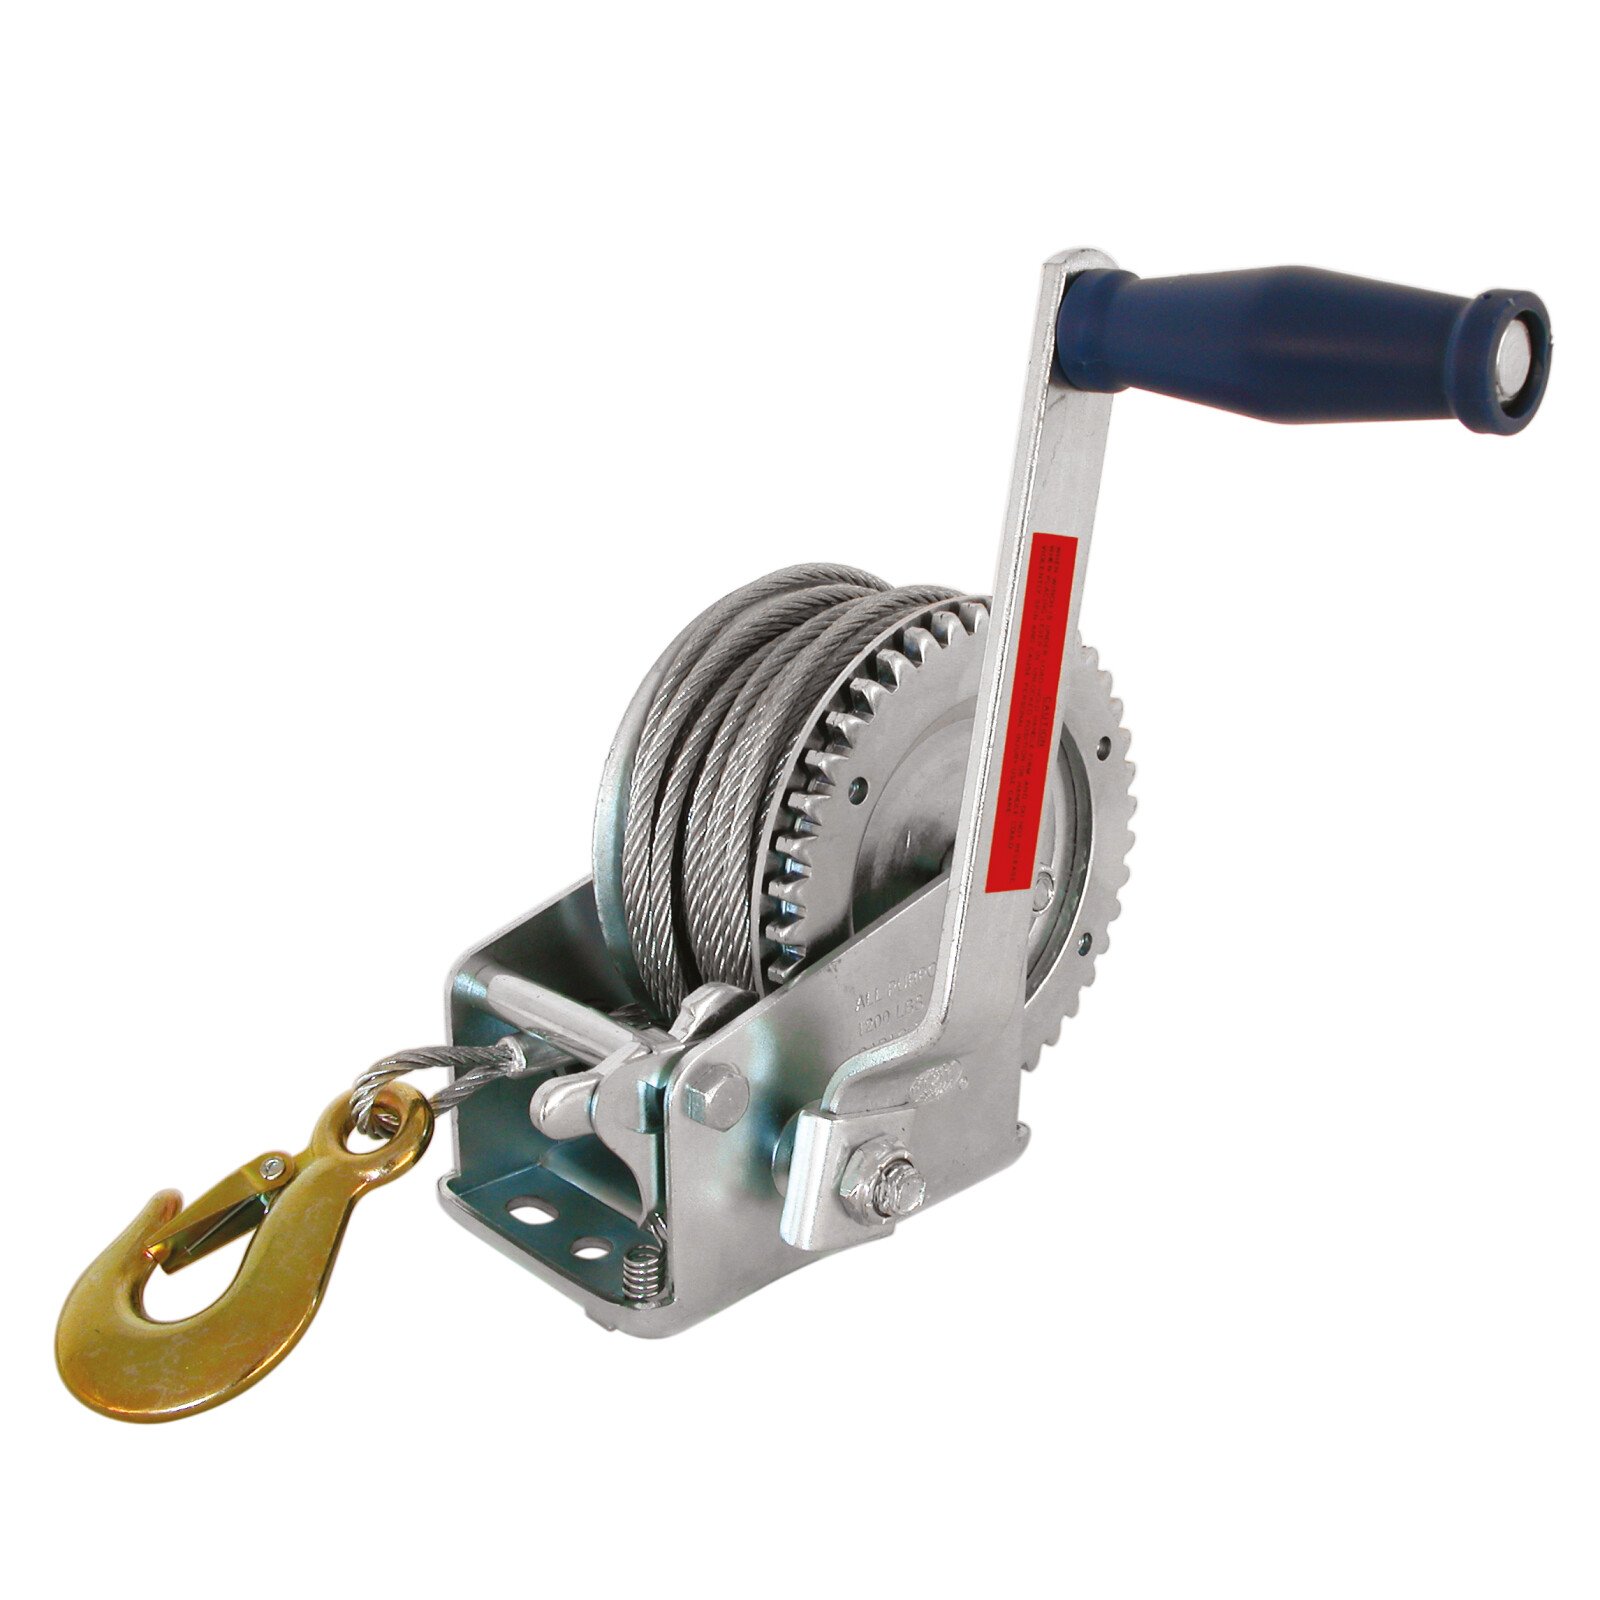 Carpoint Handwinch 545kg with 20m cable thumb